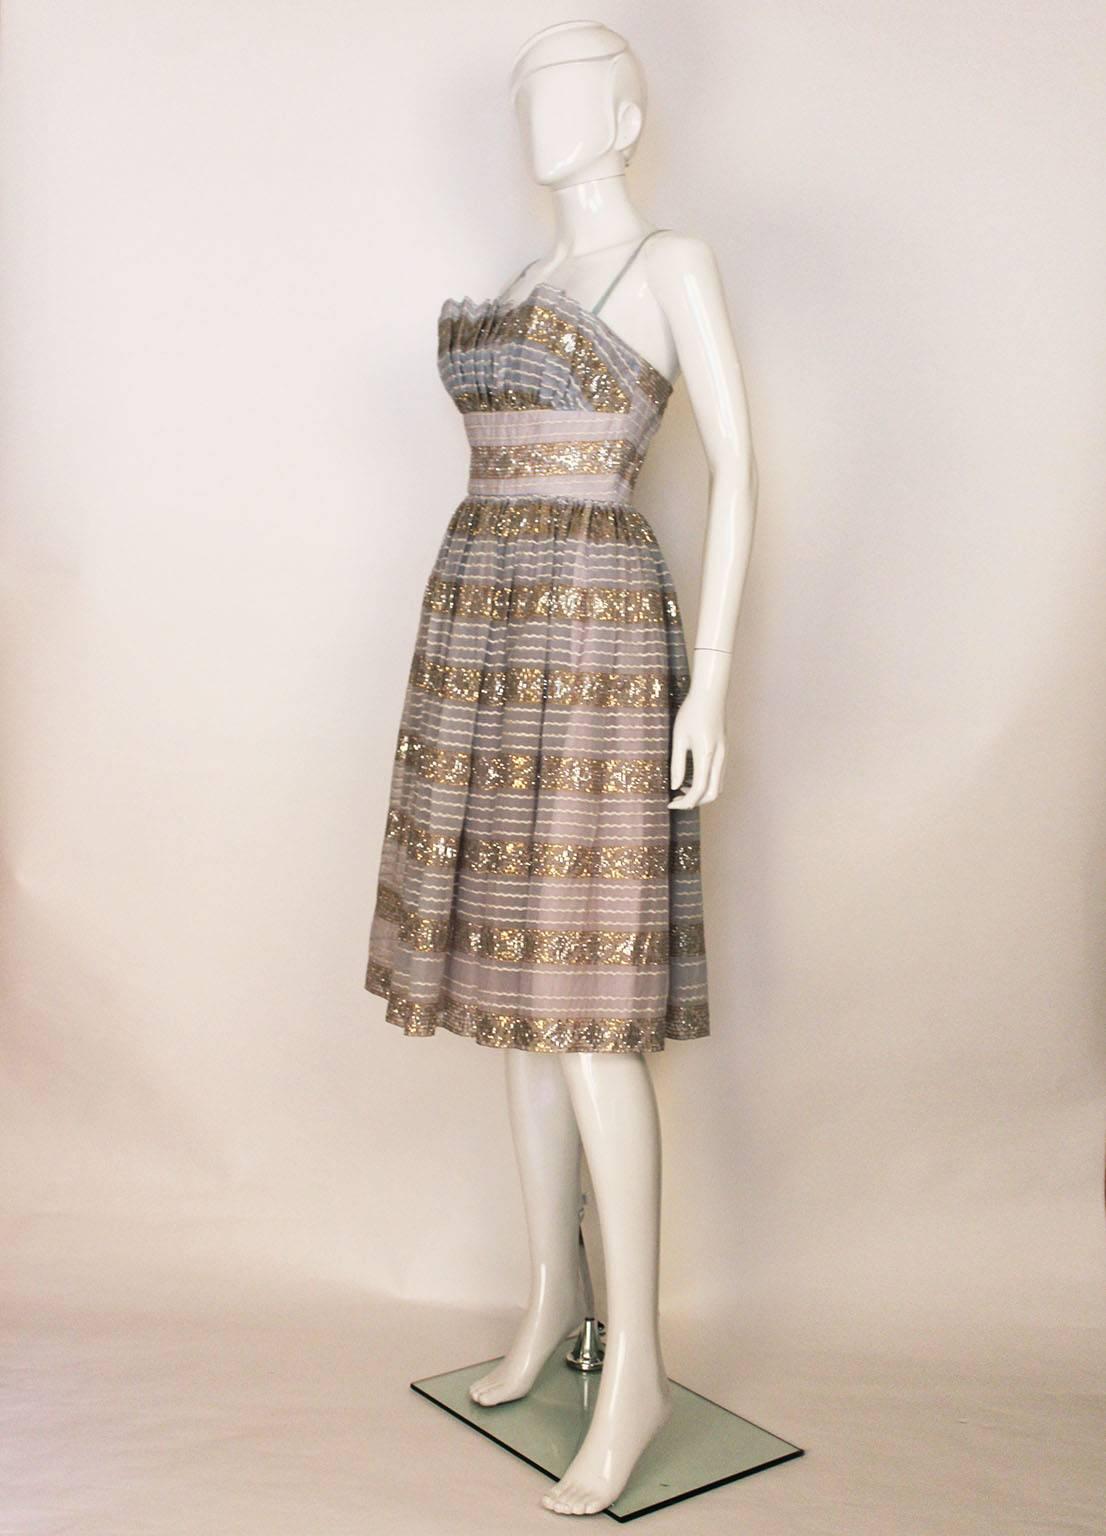 A chic cocktail/evening dress by Victor Josselyn. In a pale blue fabric with gold and silver decoration, plus white horizontal braiding, this dress is a great party piece. It has spaghetti straps,  a full skirt and is fully lined.